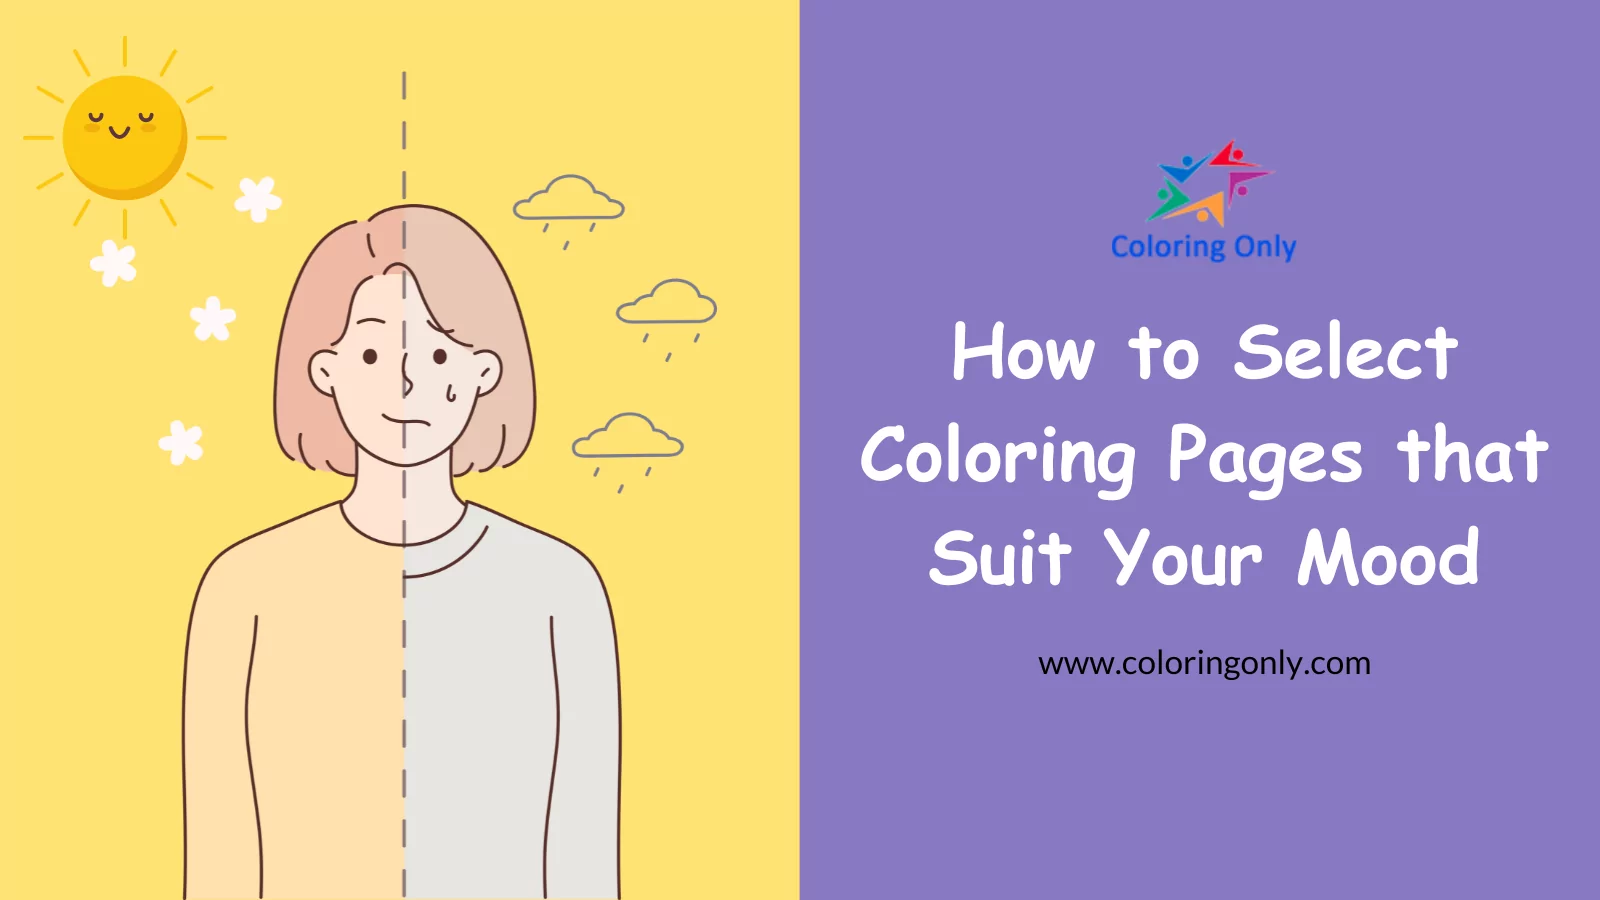 How to Select Coloring Pages that Suit Your Mood